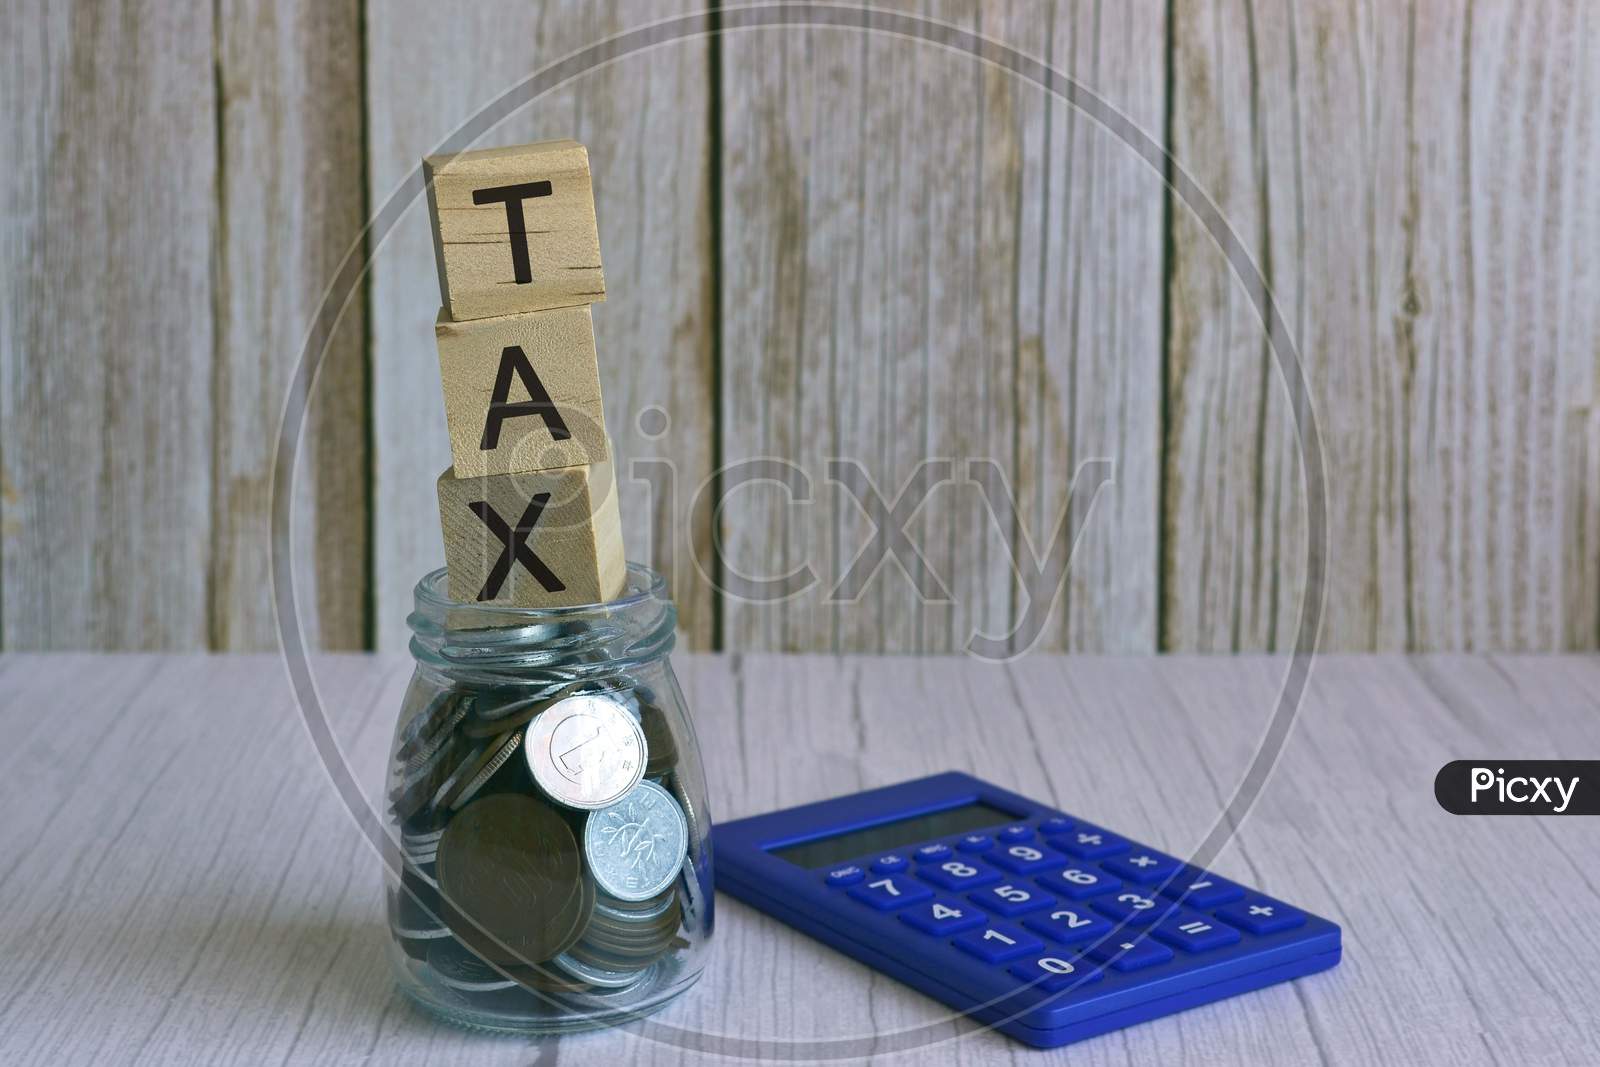 Tax text on wooden block cube on top of glass jar with multicurrency coins and calculator. Tax time concept